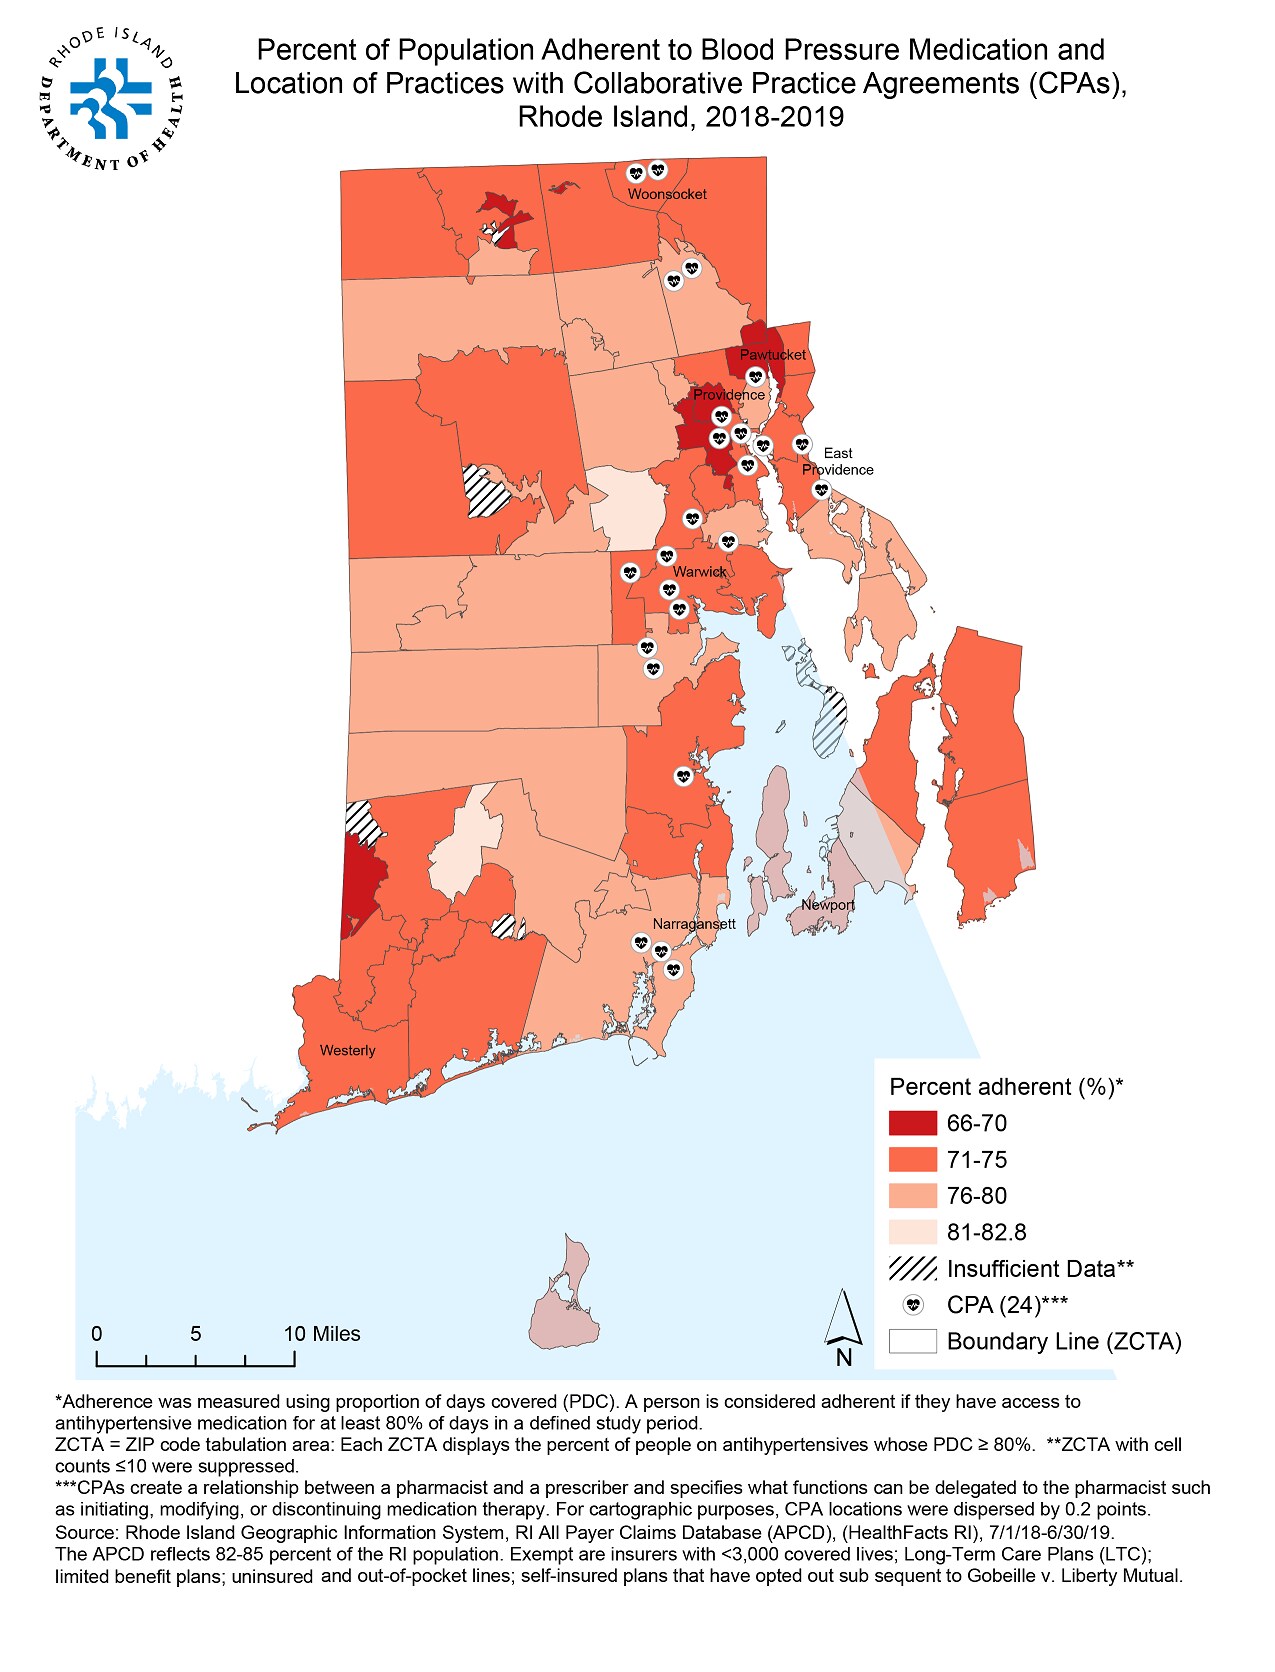 Percent of Population Adherent to Blood Pressure Medication and Location of Practices with CPAs, Rhode Island, 2018-2019